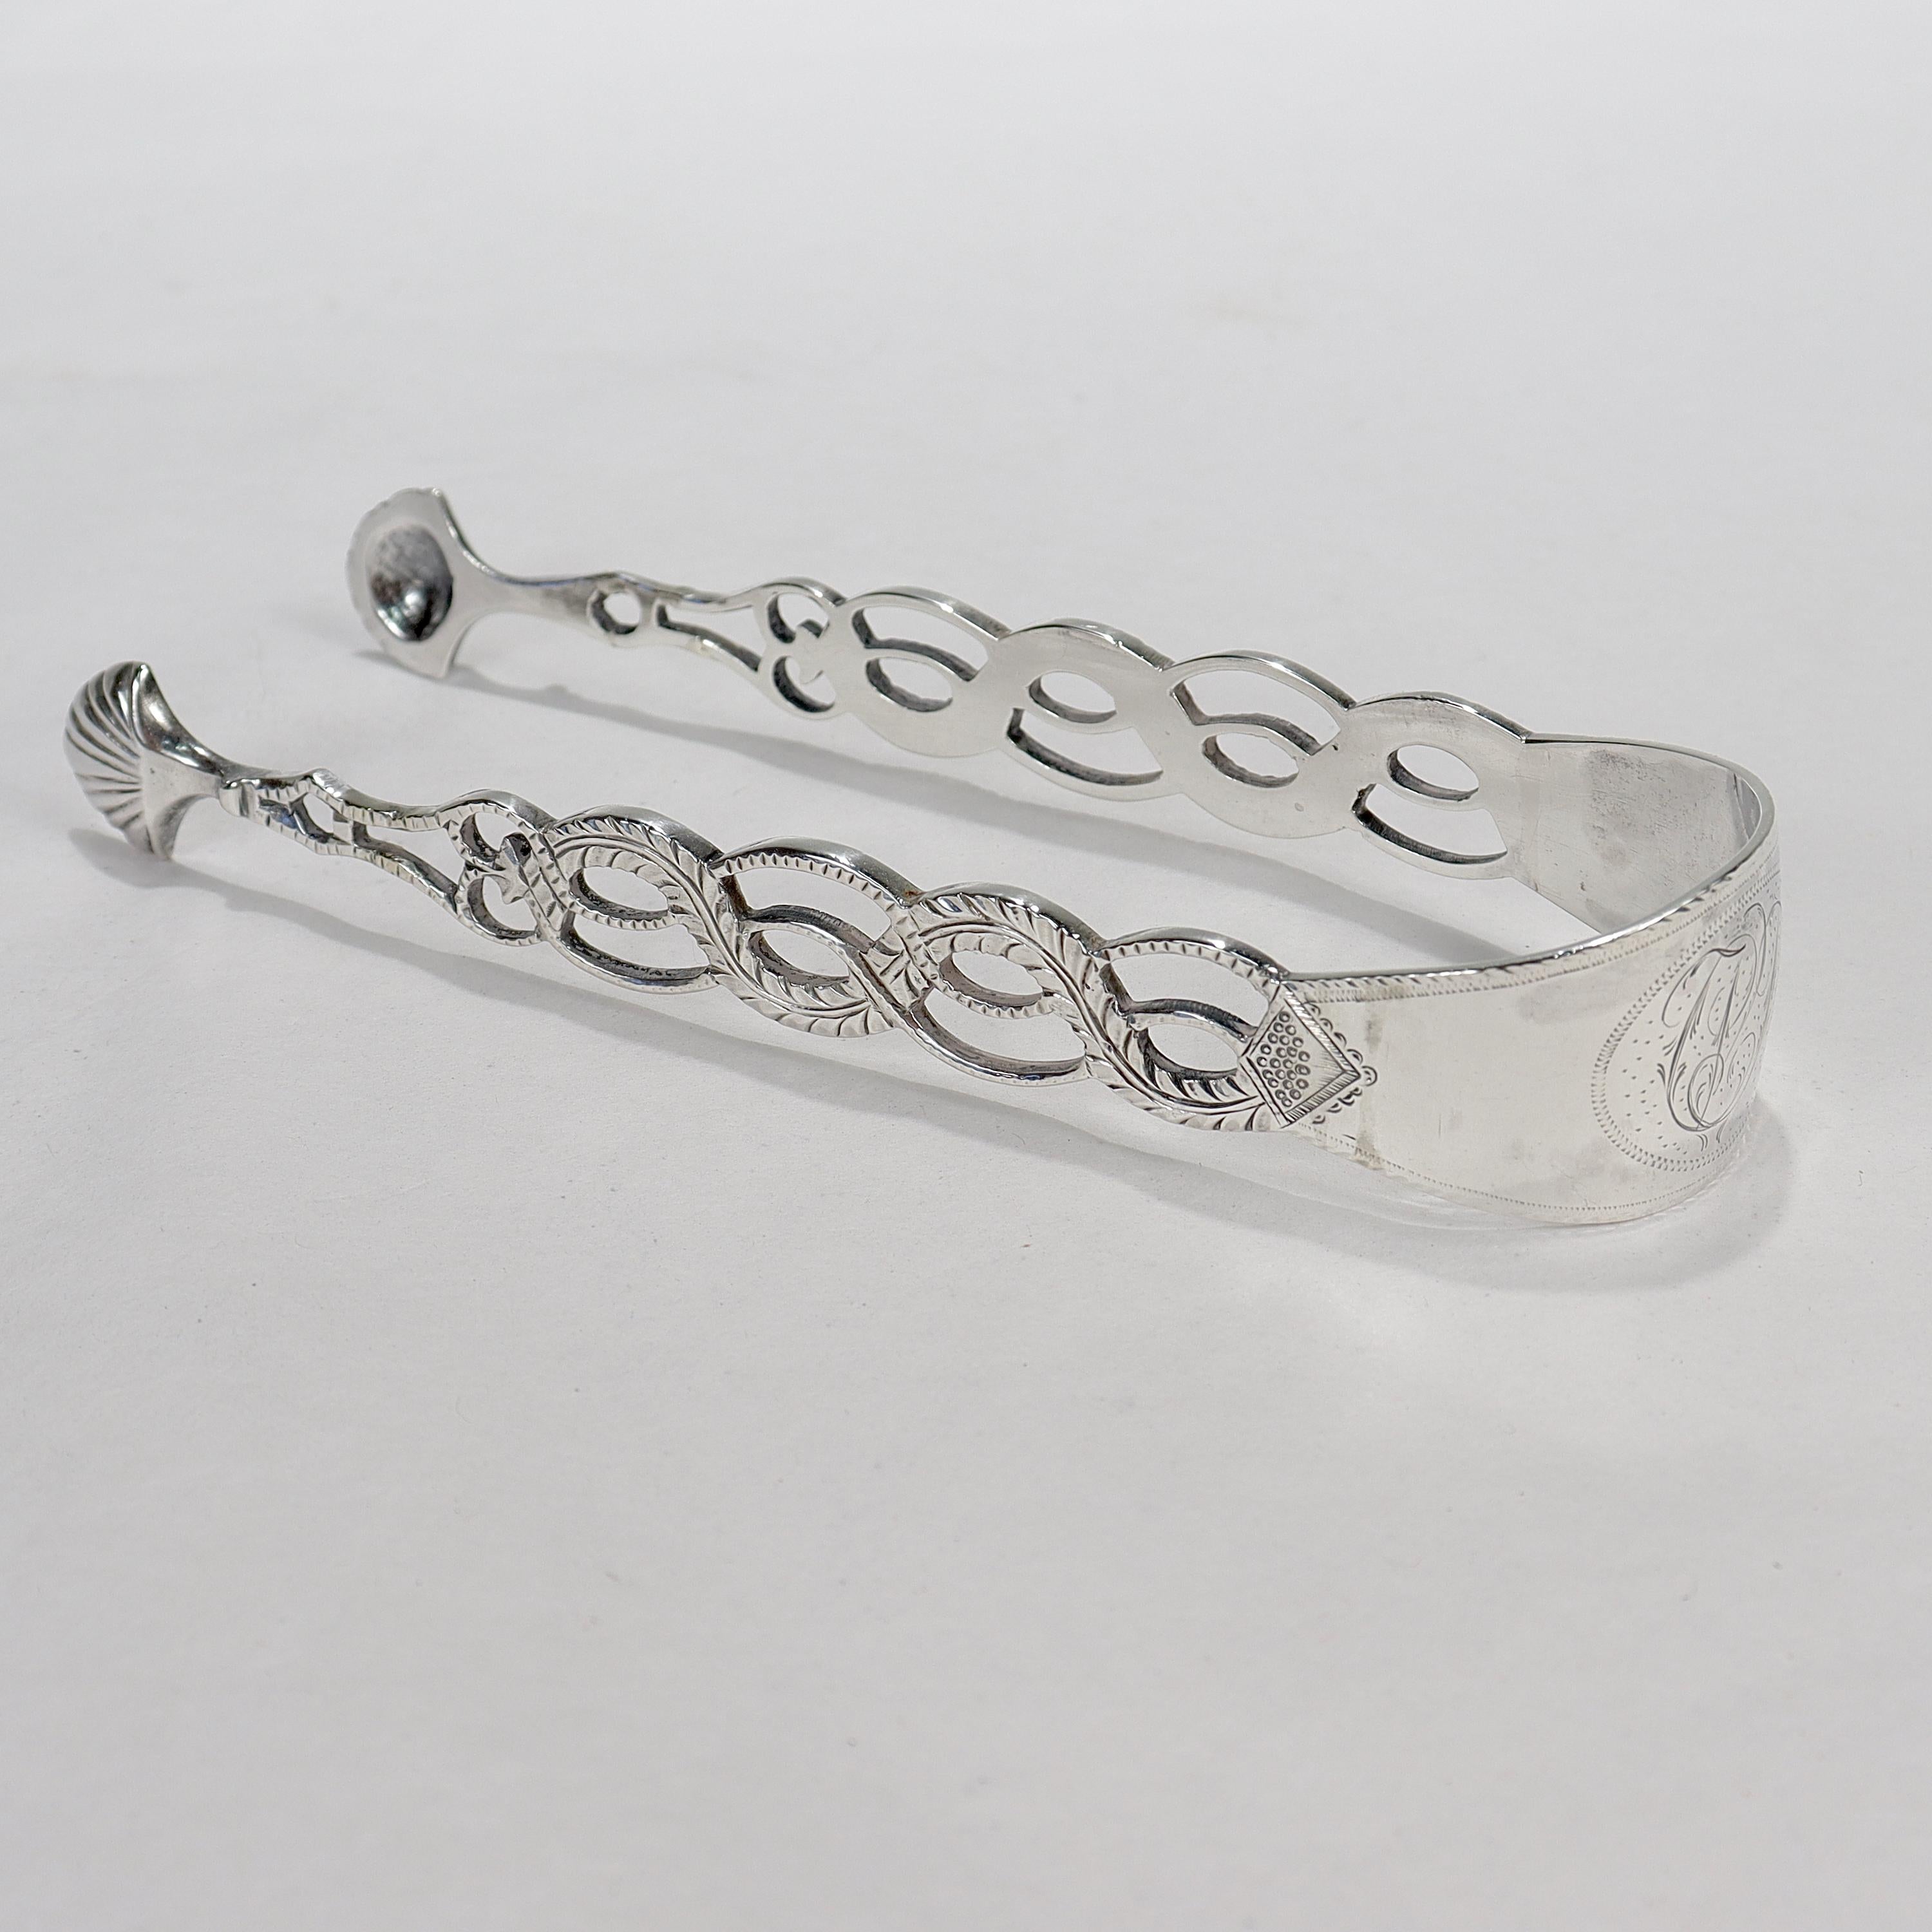 A fine pair of 18th Century silver sugar tongs.

In coin silver.

The arms of the tongs stylized as coiling ropes and terminating in figural seashell bowls.

Monogrammed to the middle of the tongs 